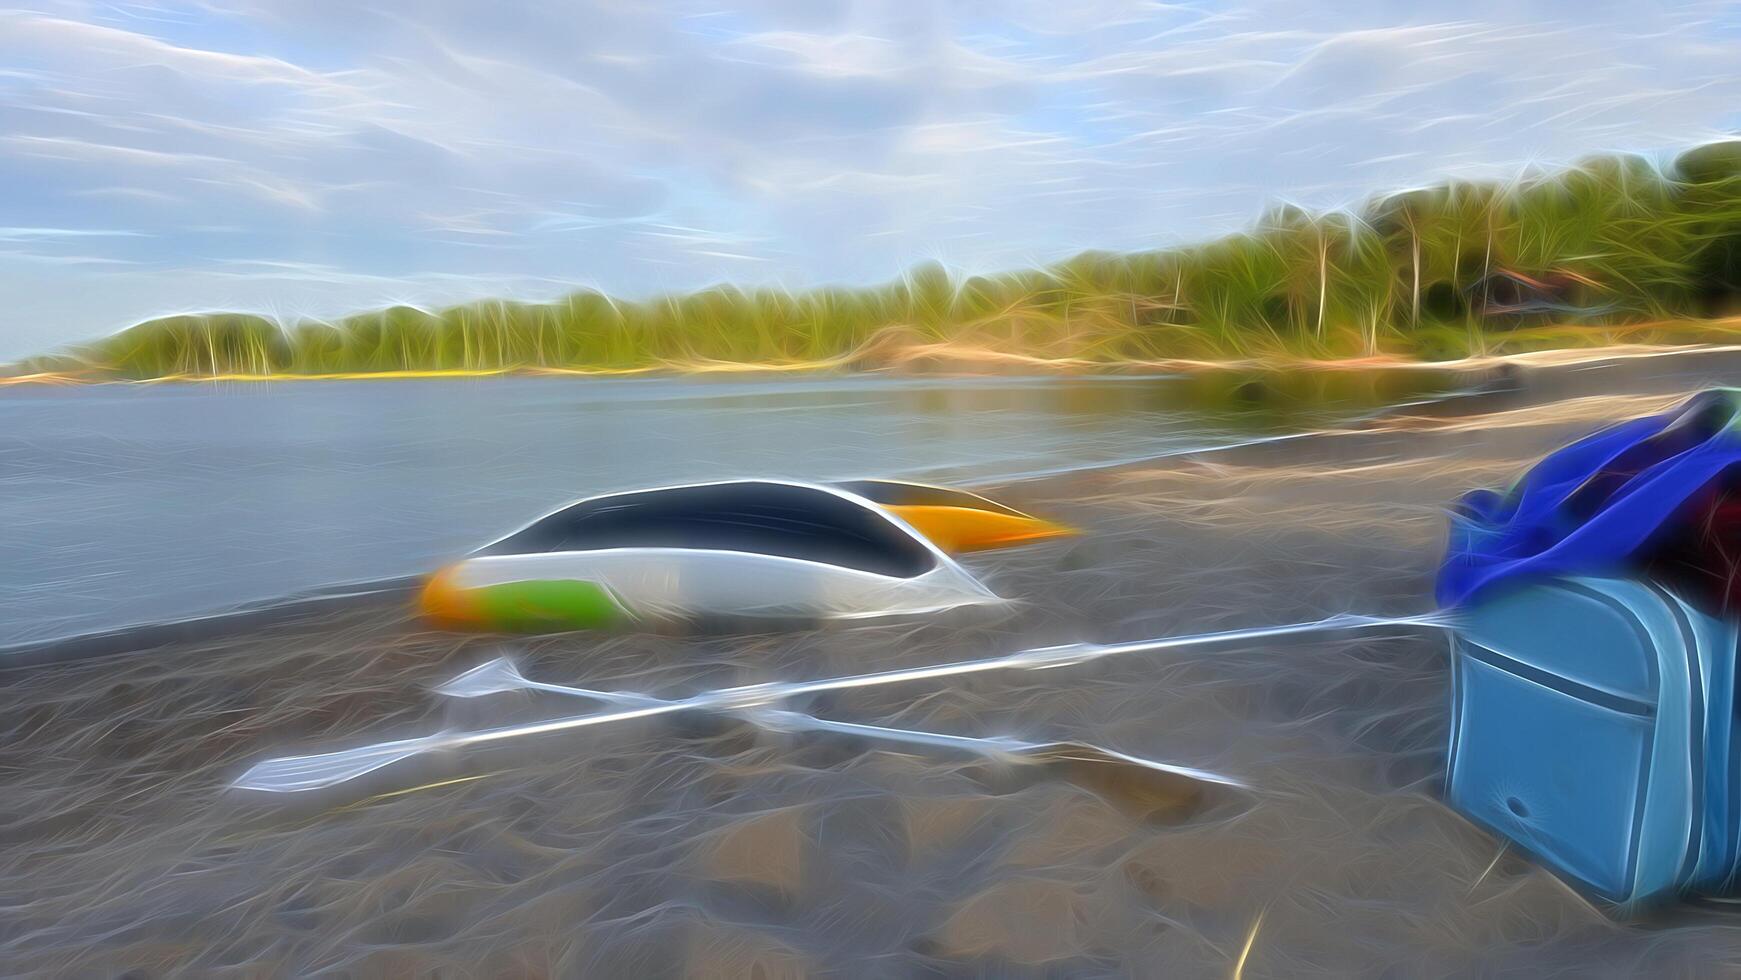 Digital painting style representing two yellow, white and green canoes placed upside down on the beach photo